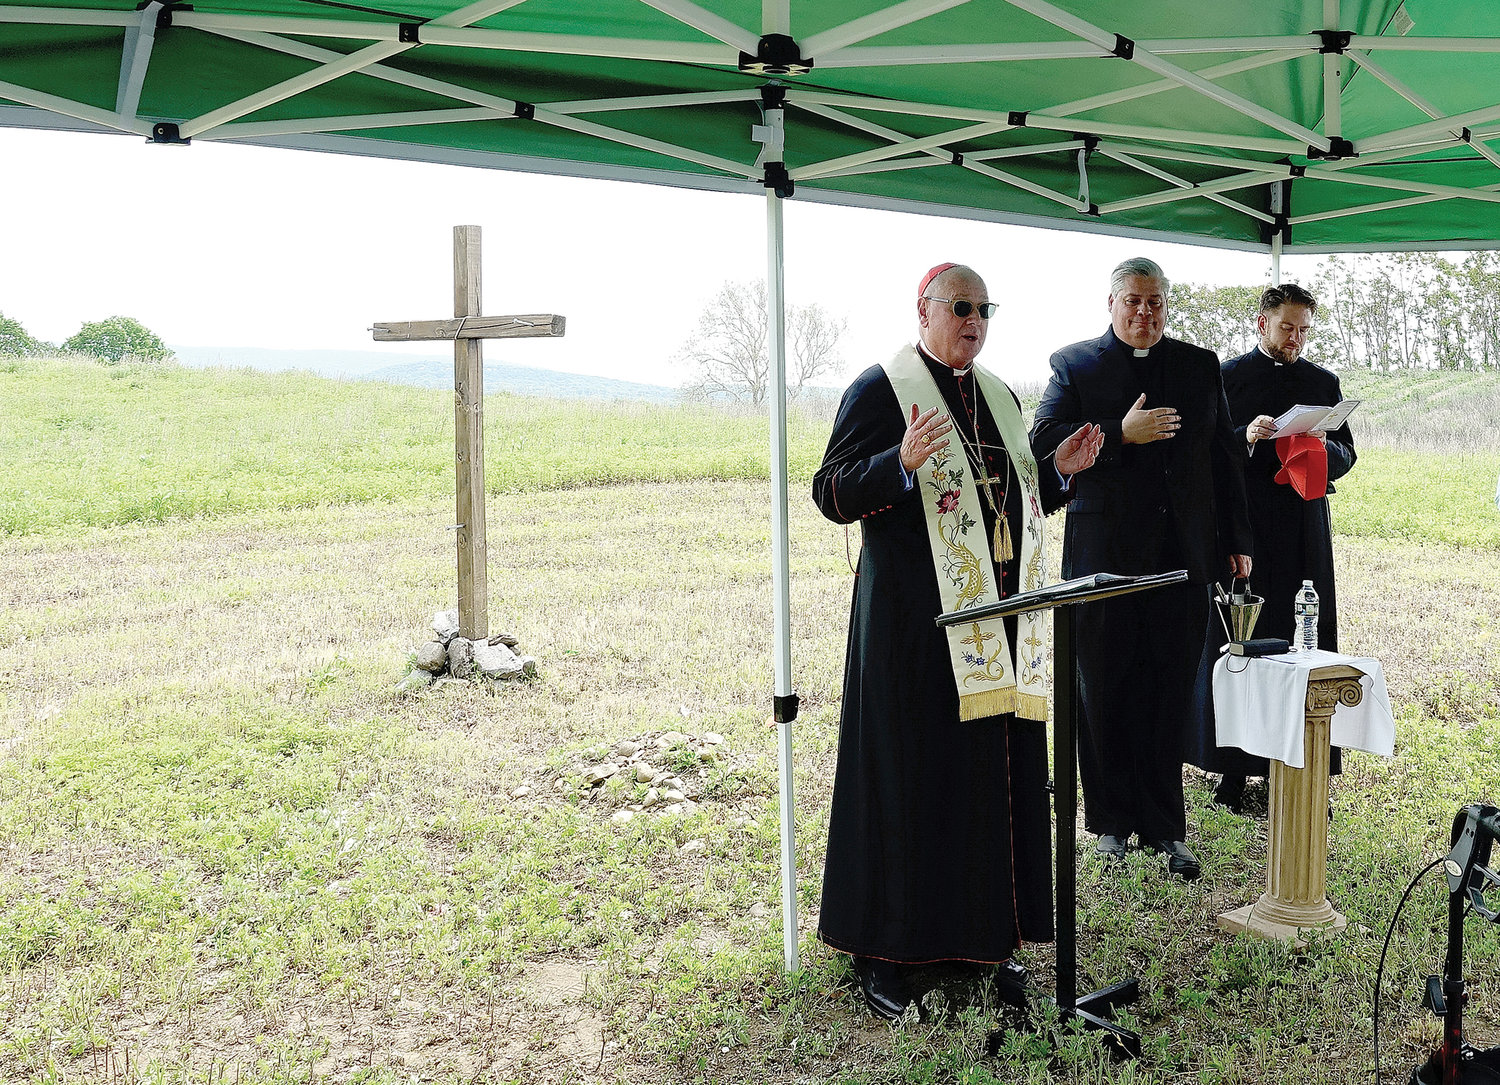 Before the playground was dedicated, the cardinal blessed new land given to the parish cemetery on Route 94 in nearby Blooming Grove for a future mausoleum and columbarium.